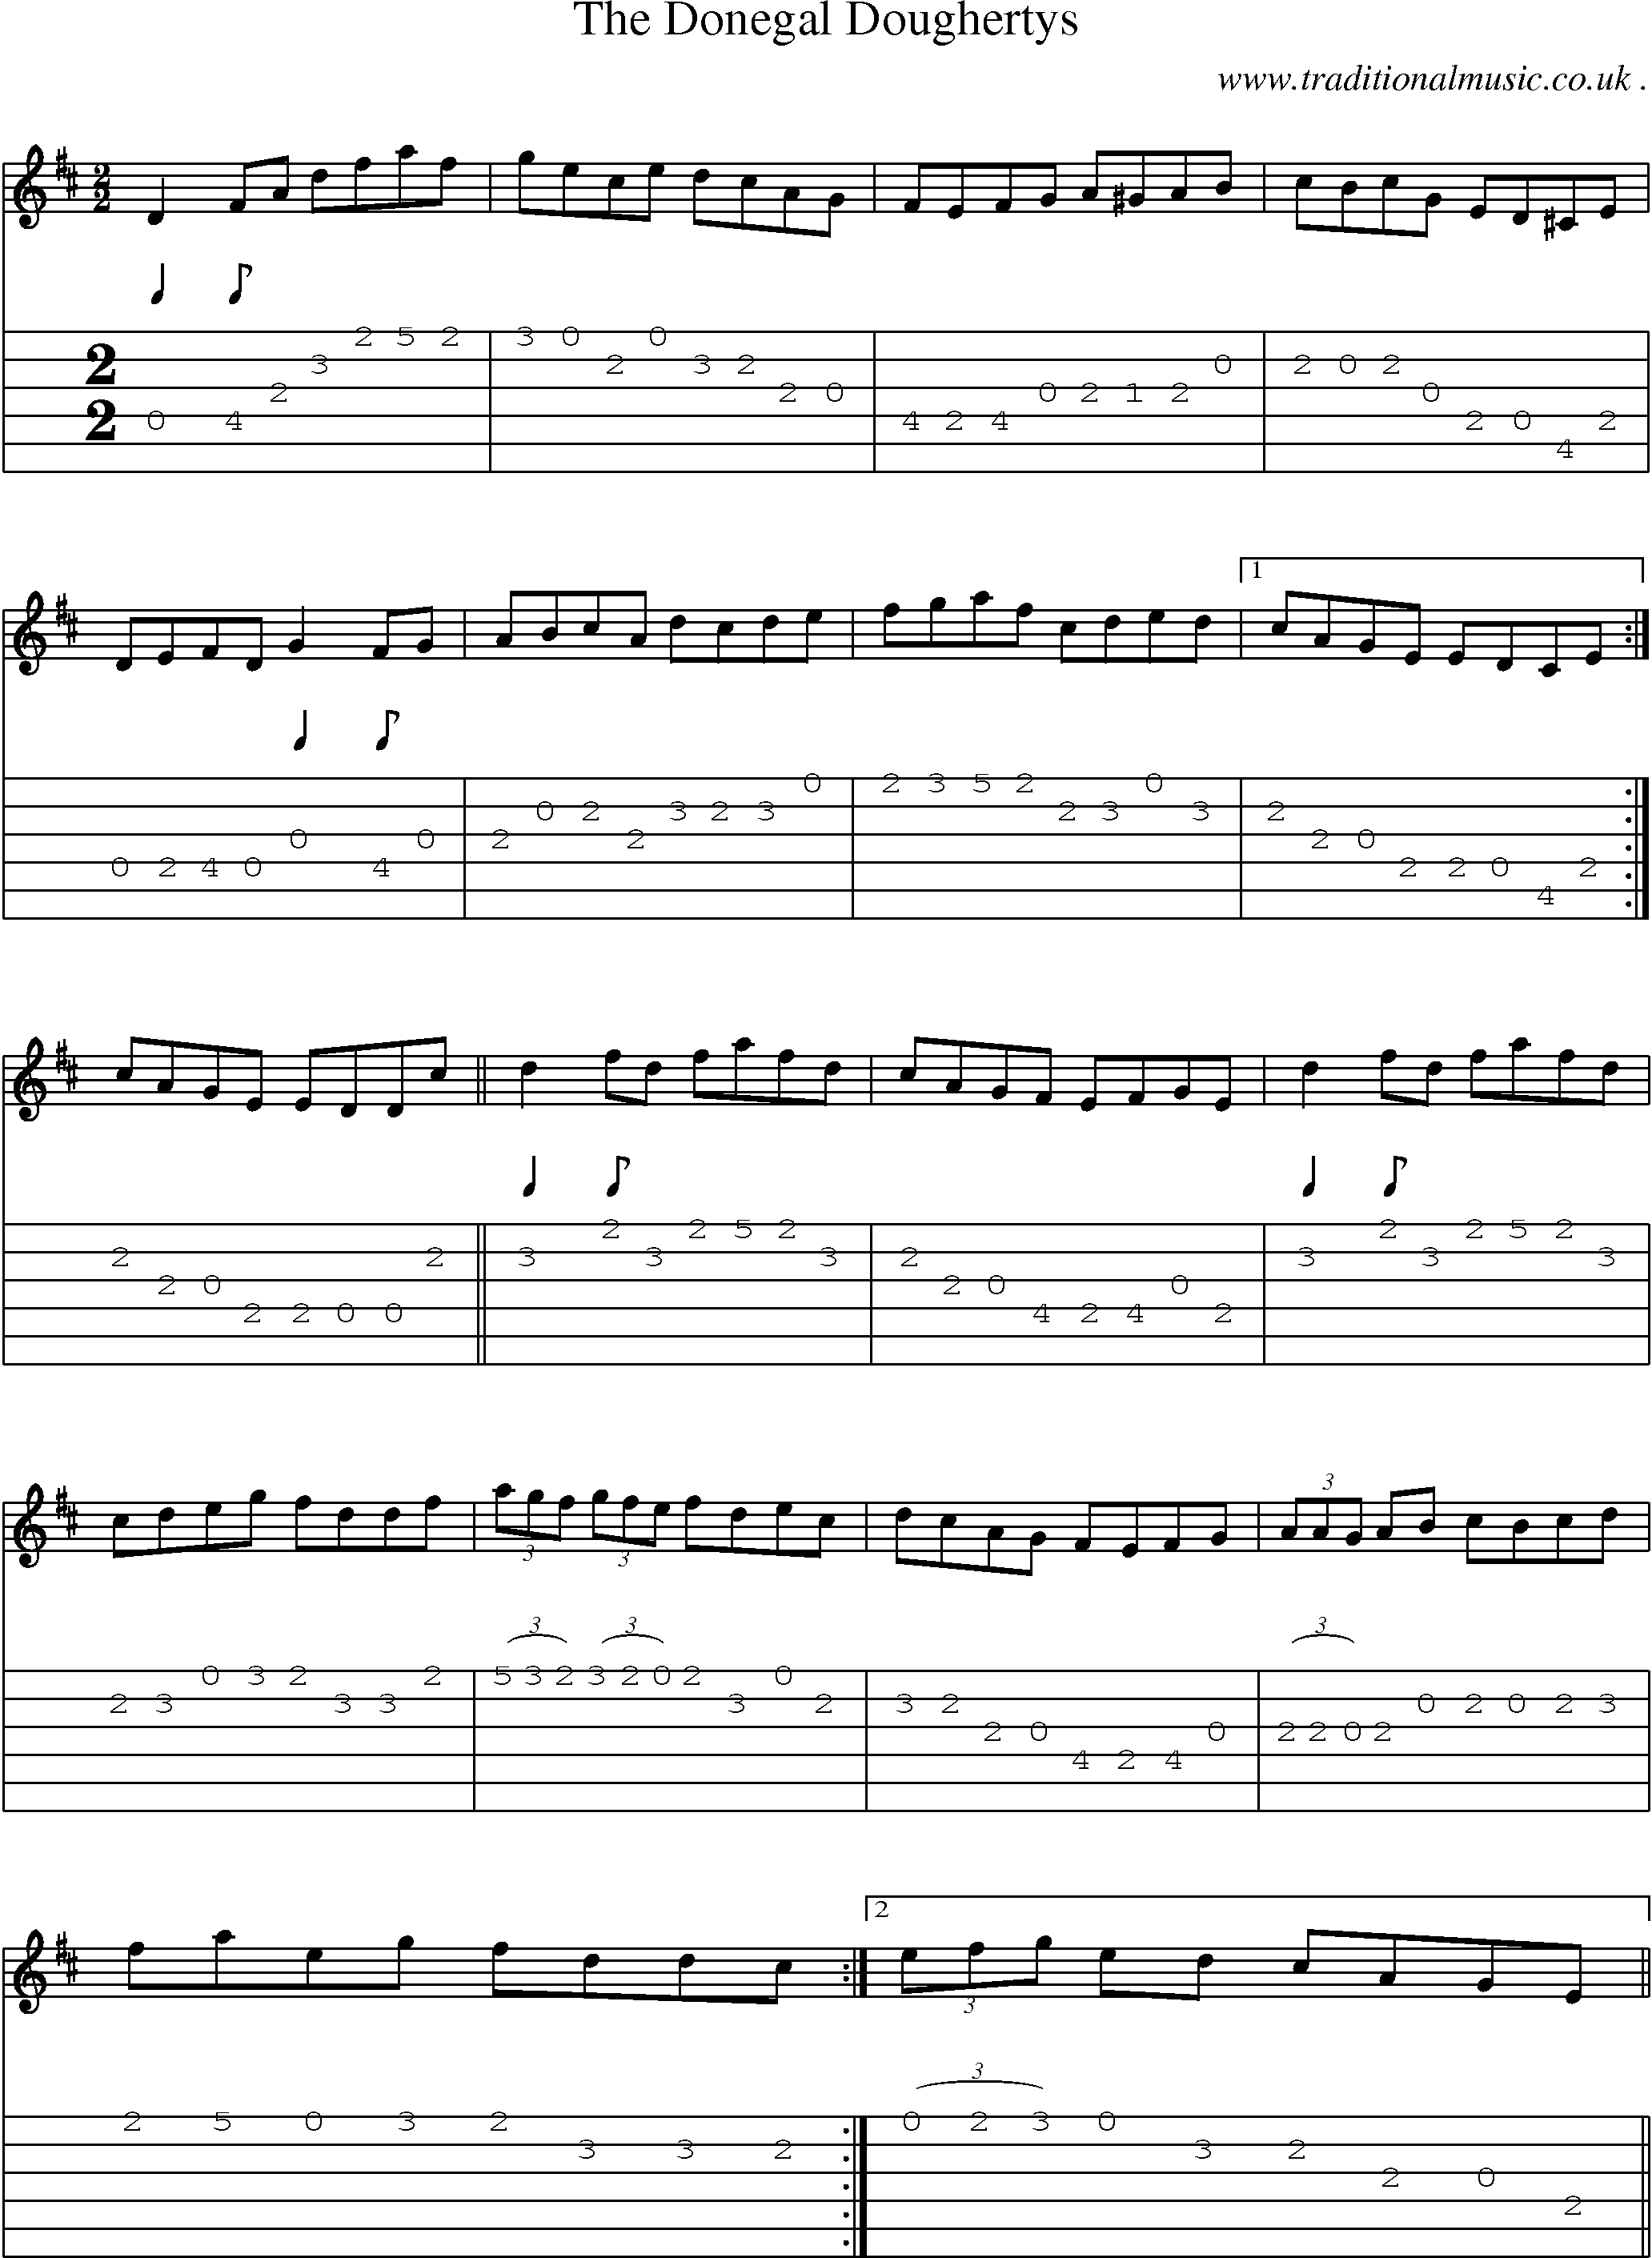 Sheet-Music and Guitar Tabs for The Donegal Doughertys